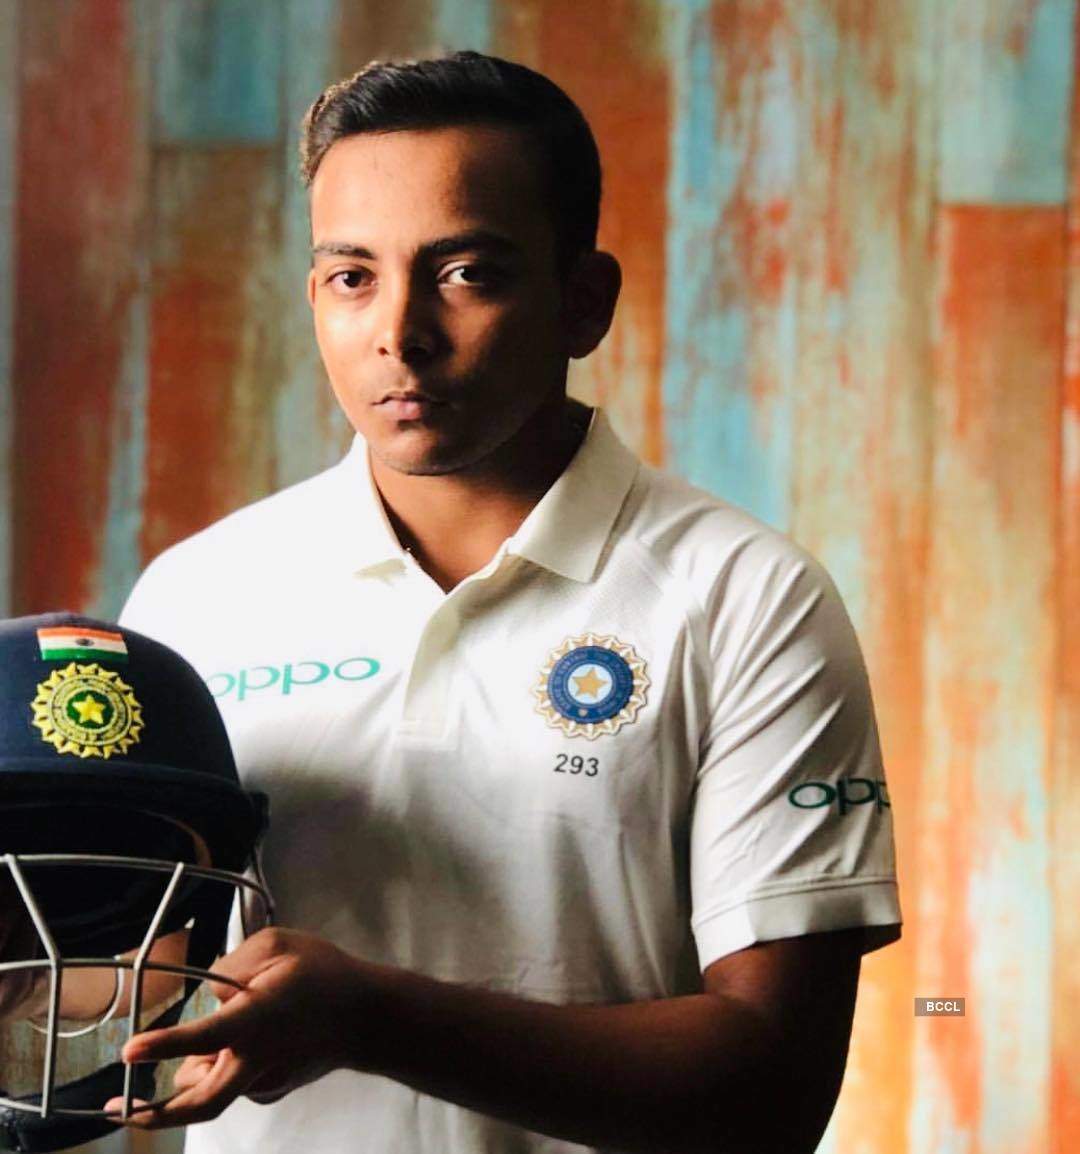 Ravi Kumar, Sumit Sangwan, Prithvi Shaw and other sports stars involved in doping scandals